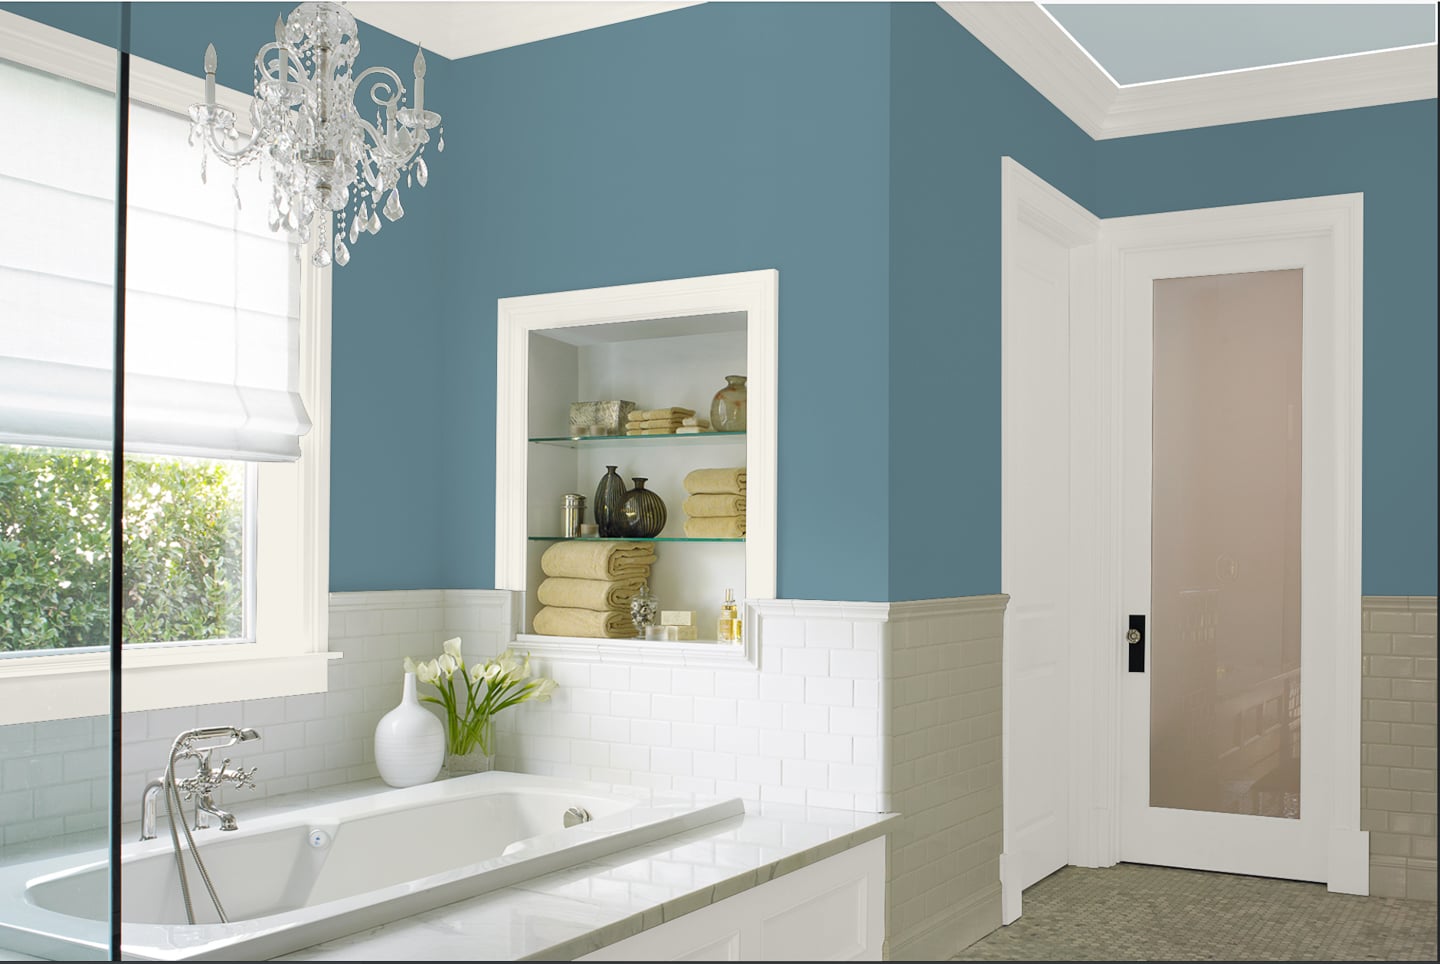 A bathroom painted in Dunn Edwards Skipping Stones